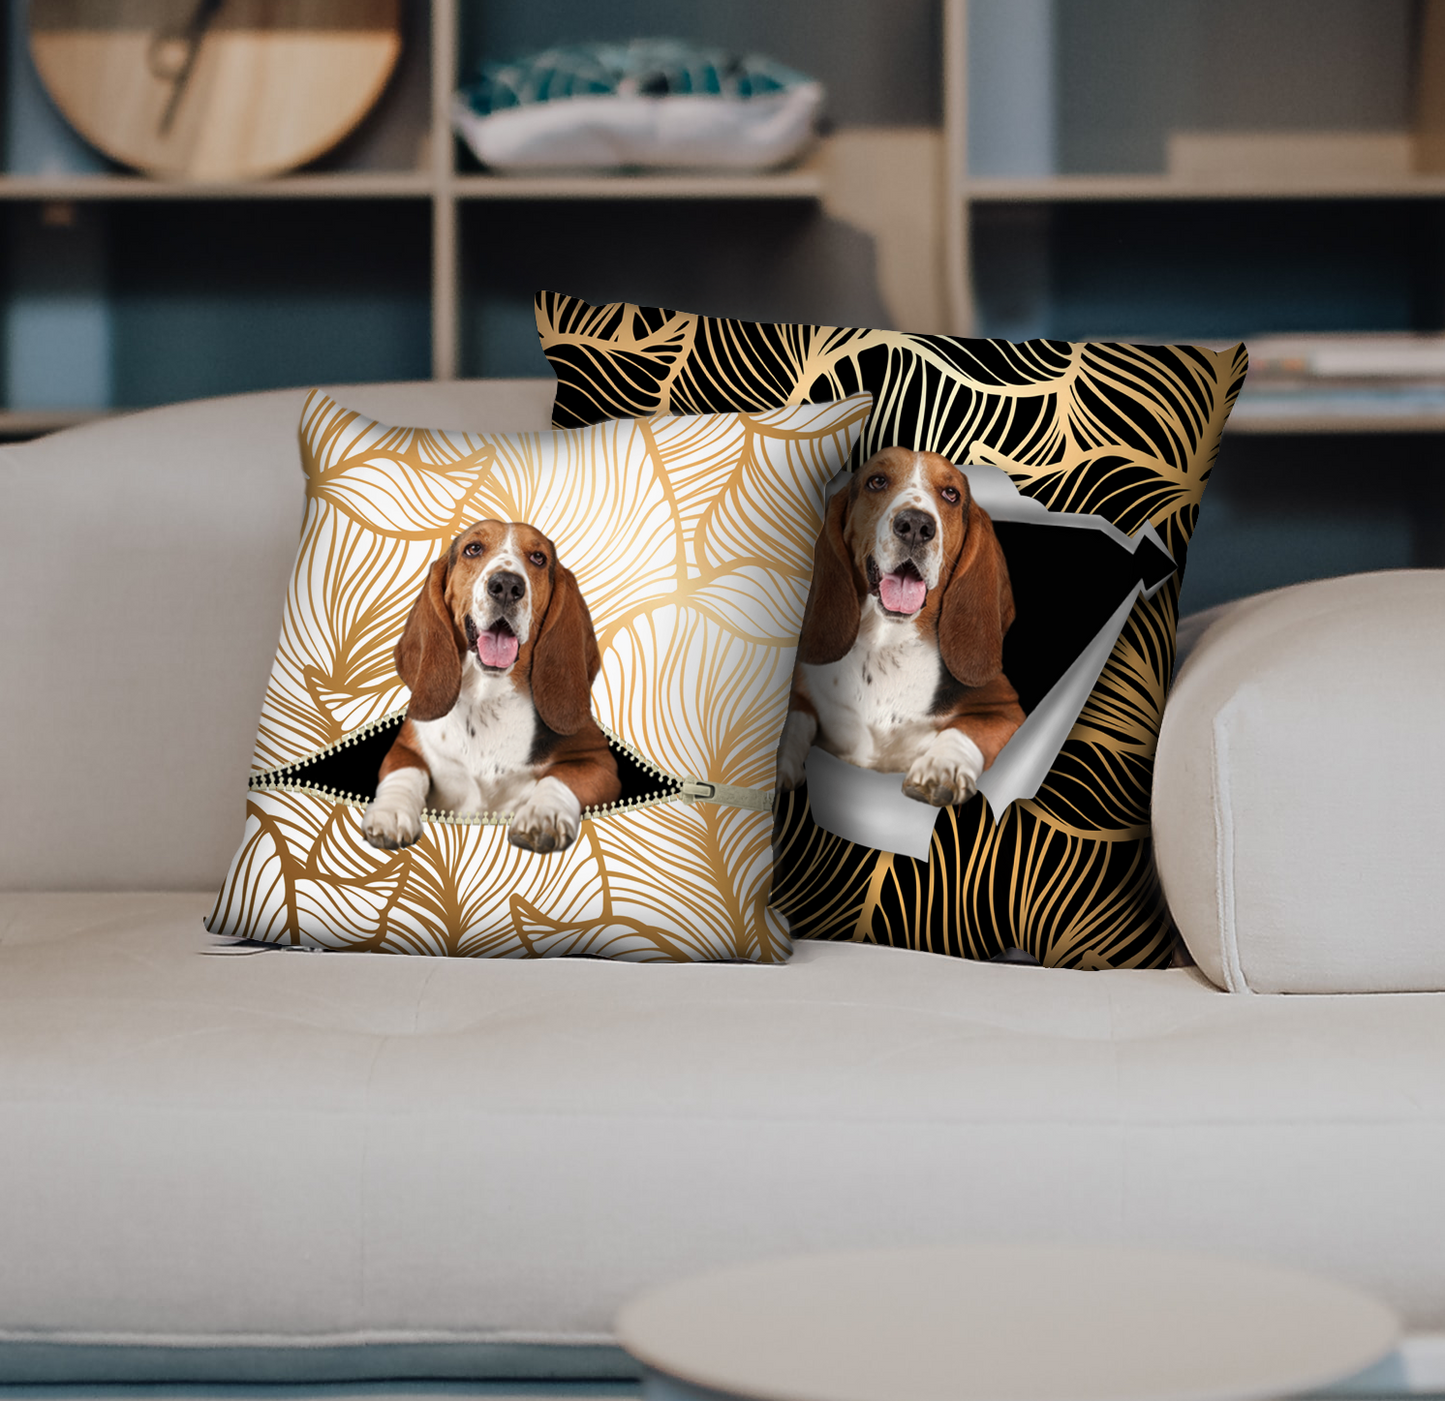 They Steal Your Couch - Basset Hound Pillow Cases V1 (Set of 2)